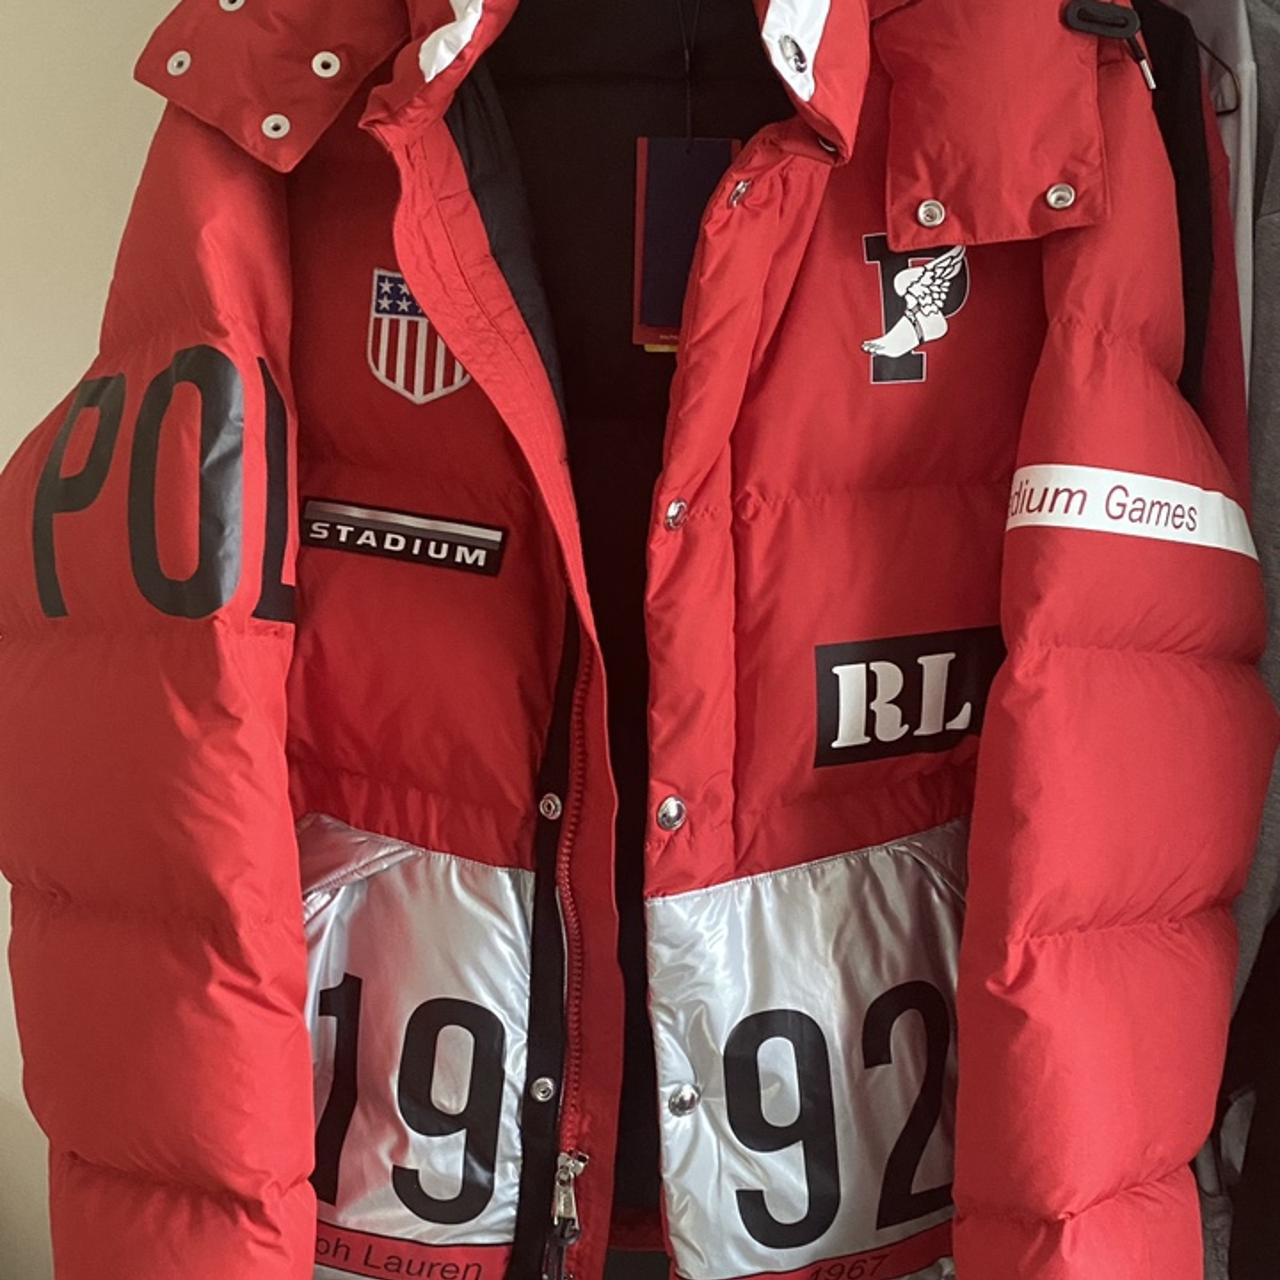 Polo Ralph Lauren Winter Stadium Down Jacket Injection Red/Silver